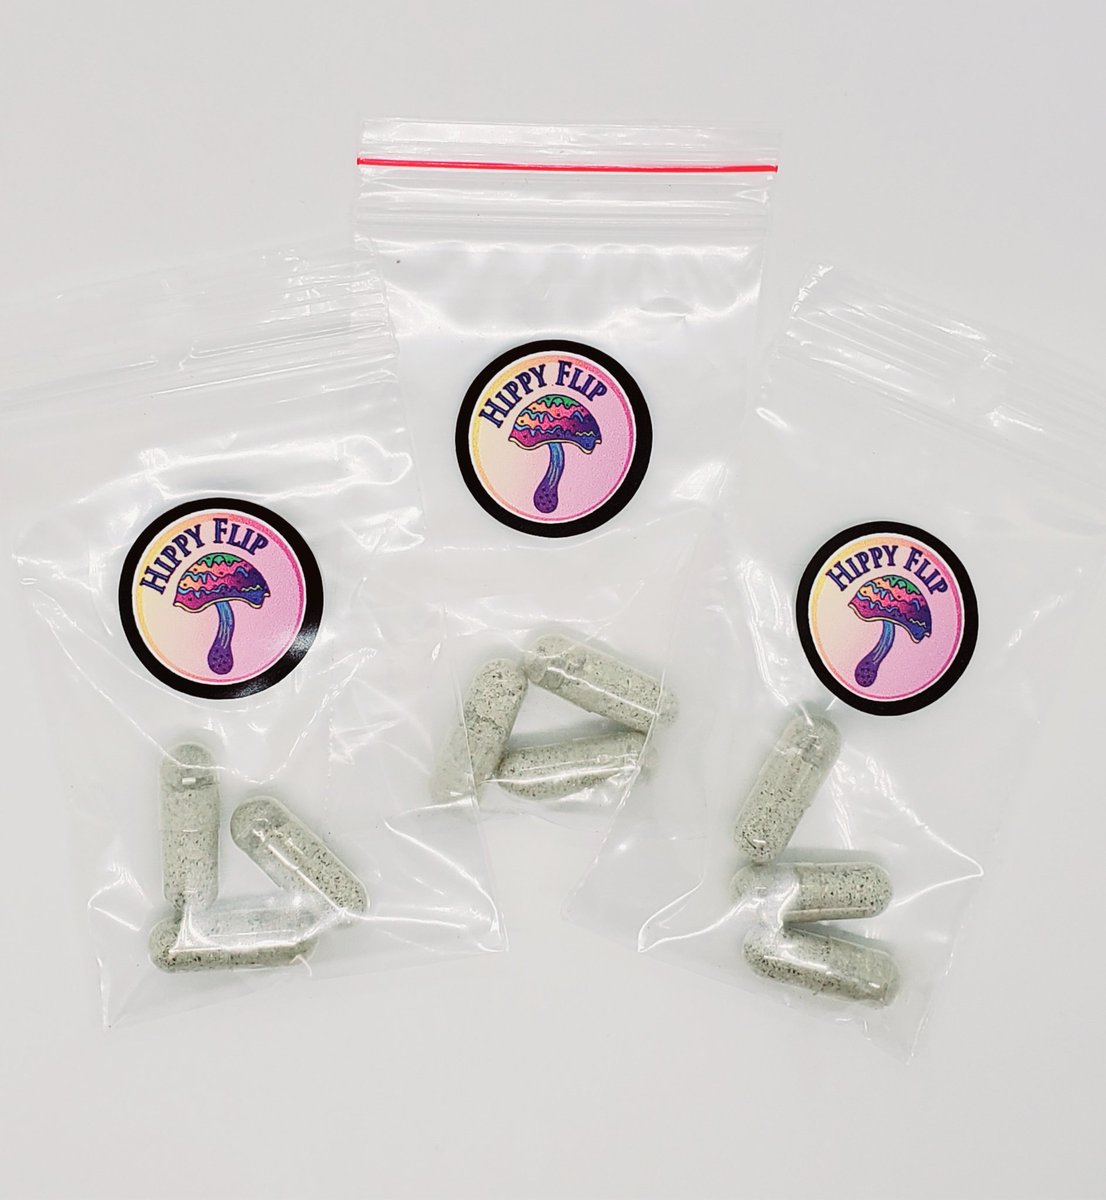 Bulk order of Hippy Flips mixing magic shrooms and Molly in capsules - 9 capsules $55 Canadian etransfer only free shipping anywhere in #Canada m.toyzforsex.com/catalog/item/8… #hippyflips #microdosingcanada #microdosing #shroomsandmolly